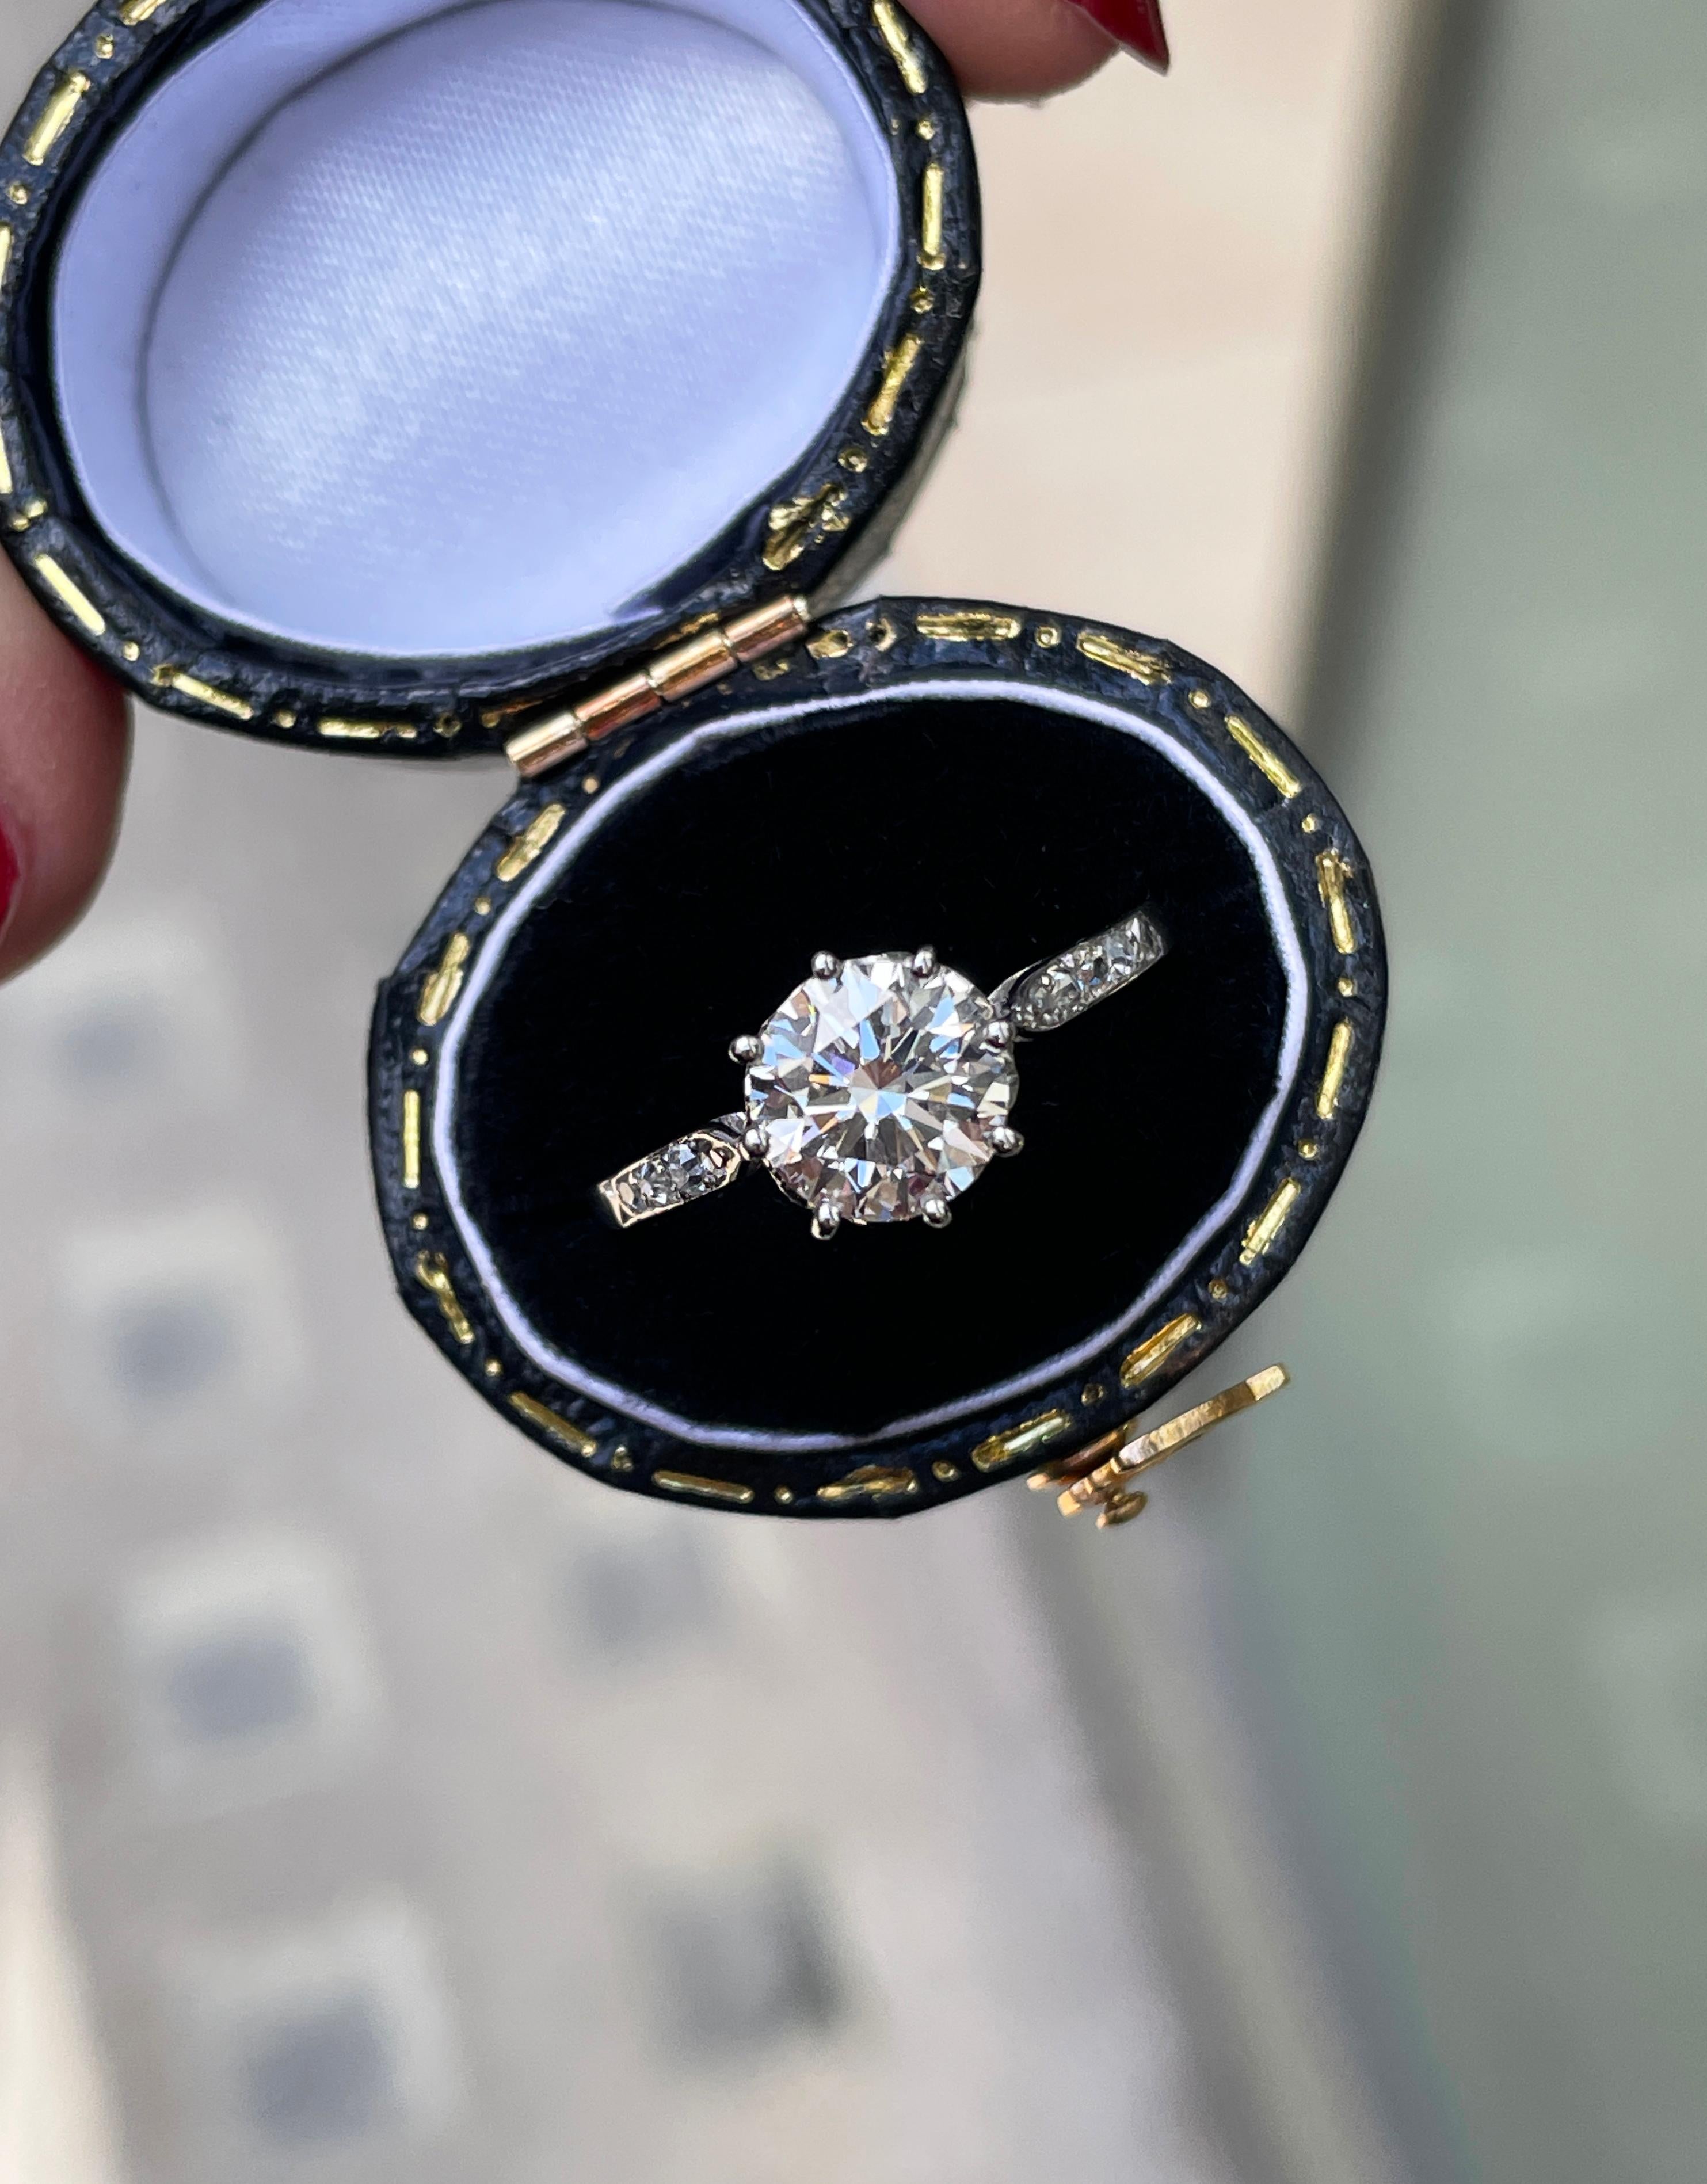 Vintage 1.37 Carat Old Cut Diamond Platinum Engagement Ring, circa 1950s In Good Condition For Sale In London, GB